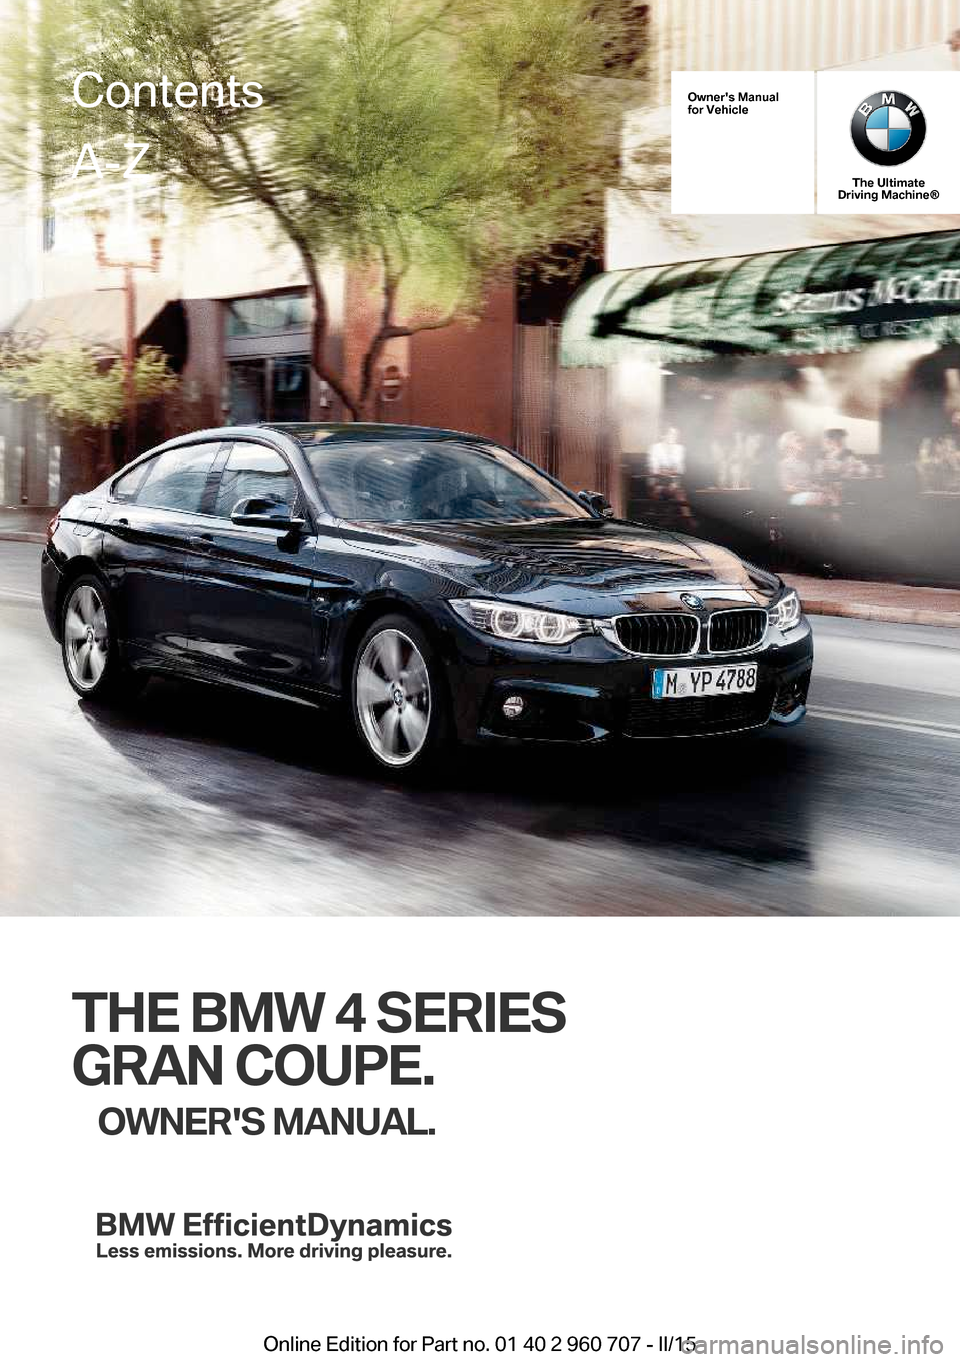 BMW 4 SERIES GRAN COUPE 2015 F36 Owners Manual Owners Manual
for Vehicle
The Ultimate
Driving Machine®
THE BMW 4 SERIES
GRAN COUPE. OWNERS MANUAL.
ContentsA-Z
Online Edition for Part no. 01 40 2 960 707 - II/15   